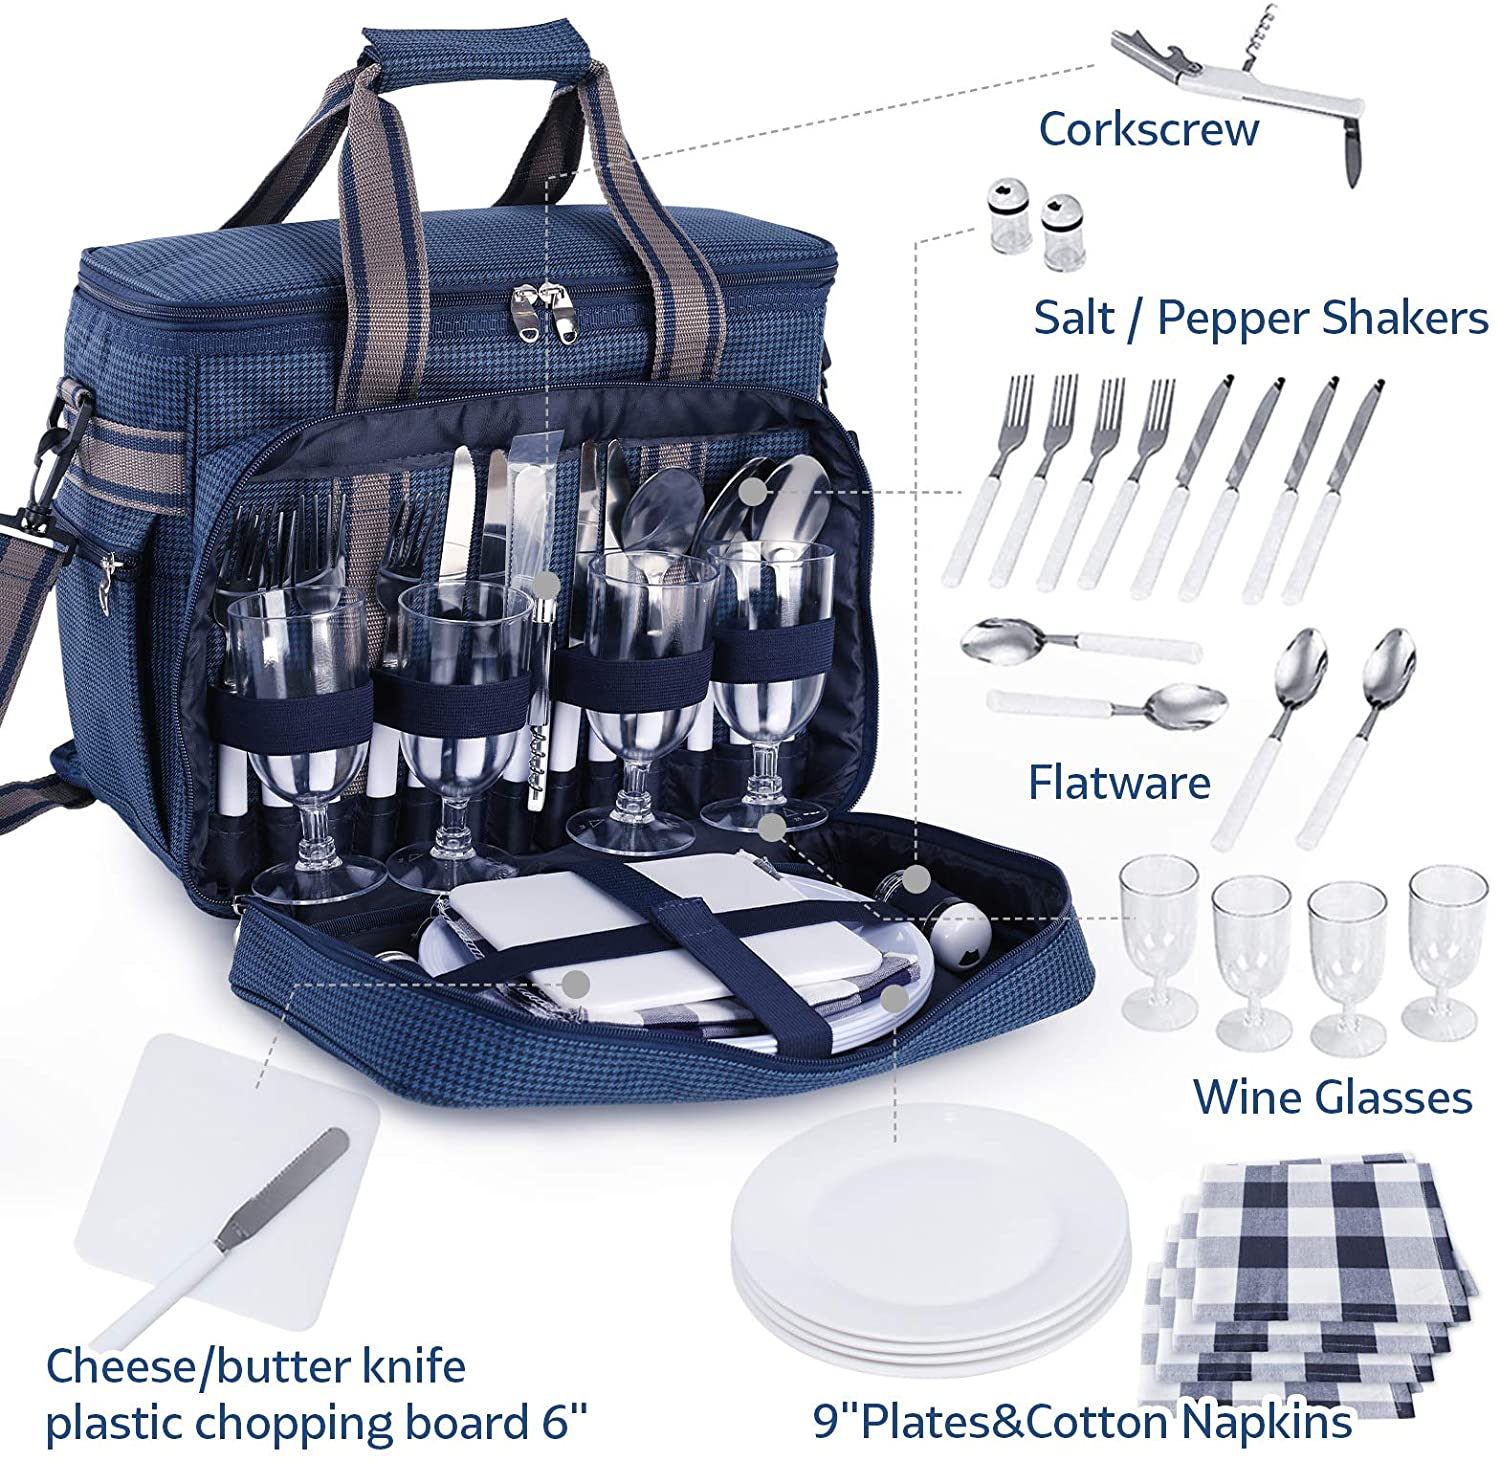 Picnic Backpack for 4 Person， Picnic Basket Tote， Large Picnic Bag with Cooler Compartment and Blanket， Picnic Shoulder Bag Set Perfect for Camping， Day Travel， Hiking， BBQs (Blue)